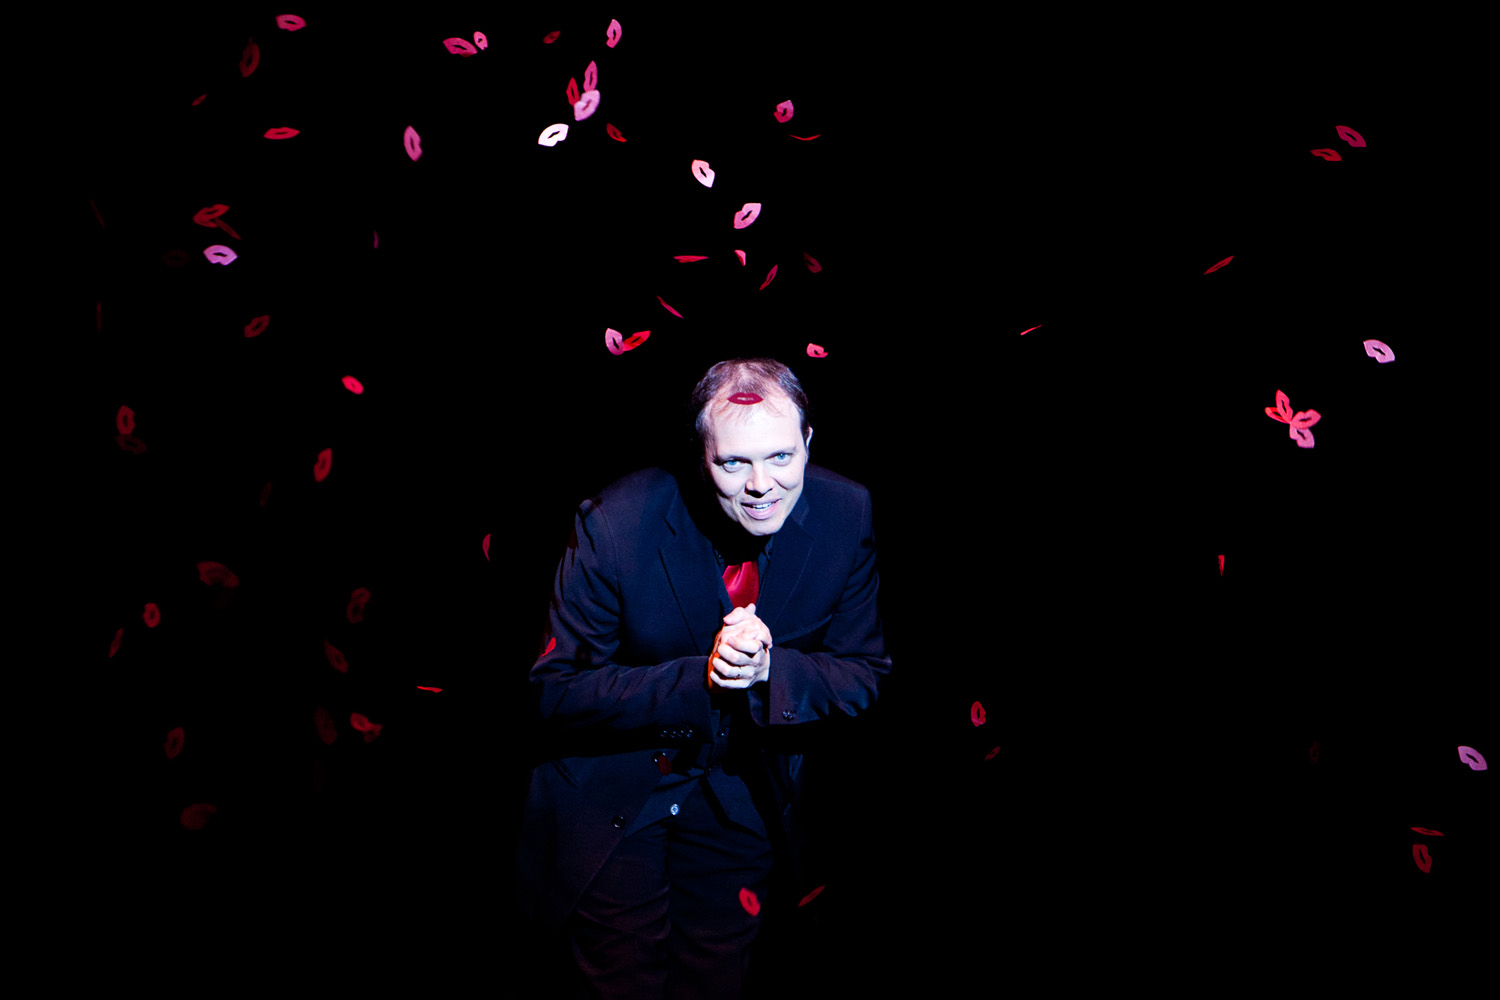 The French magician Boris Wild taking a bow at the end of his close-up act « The Kiss Act » awarded at FISM